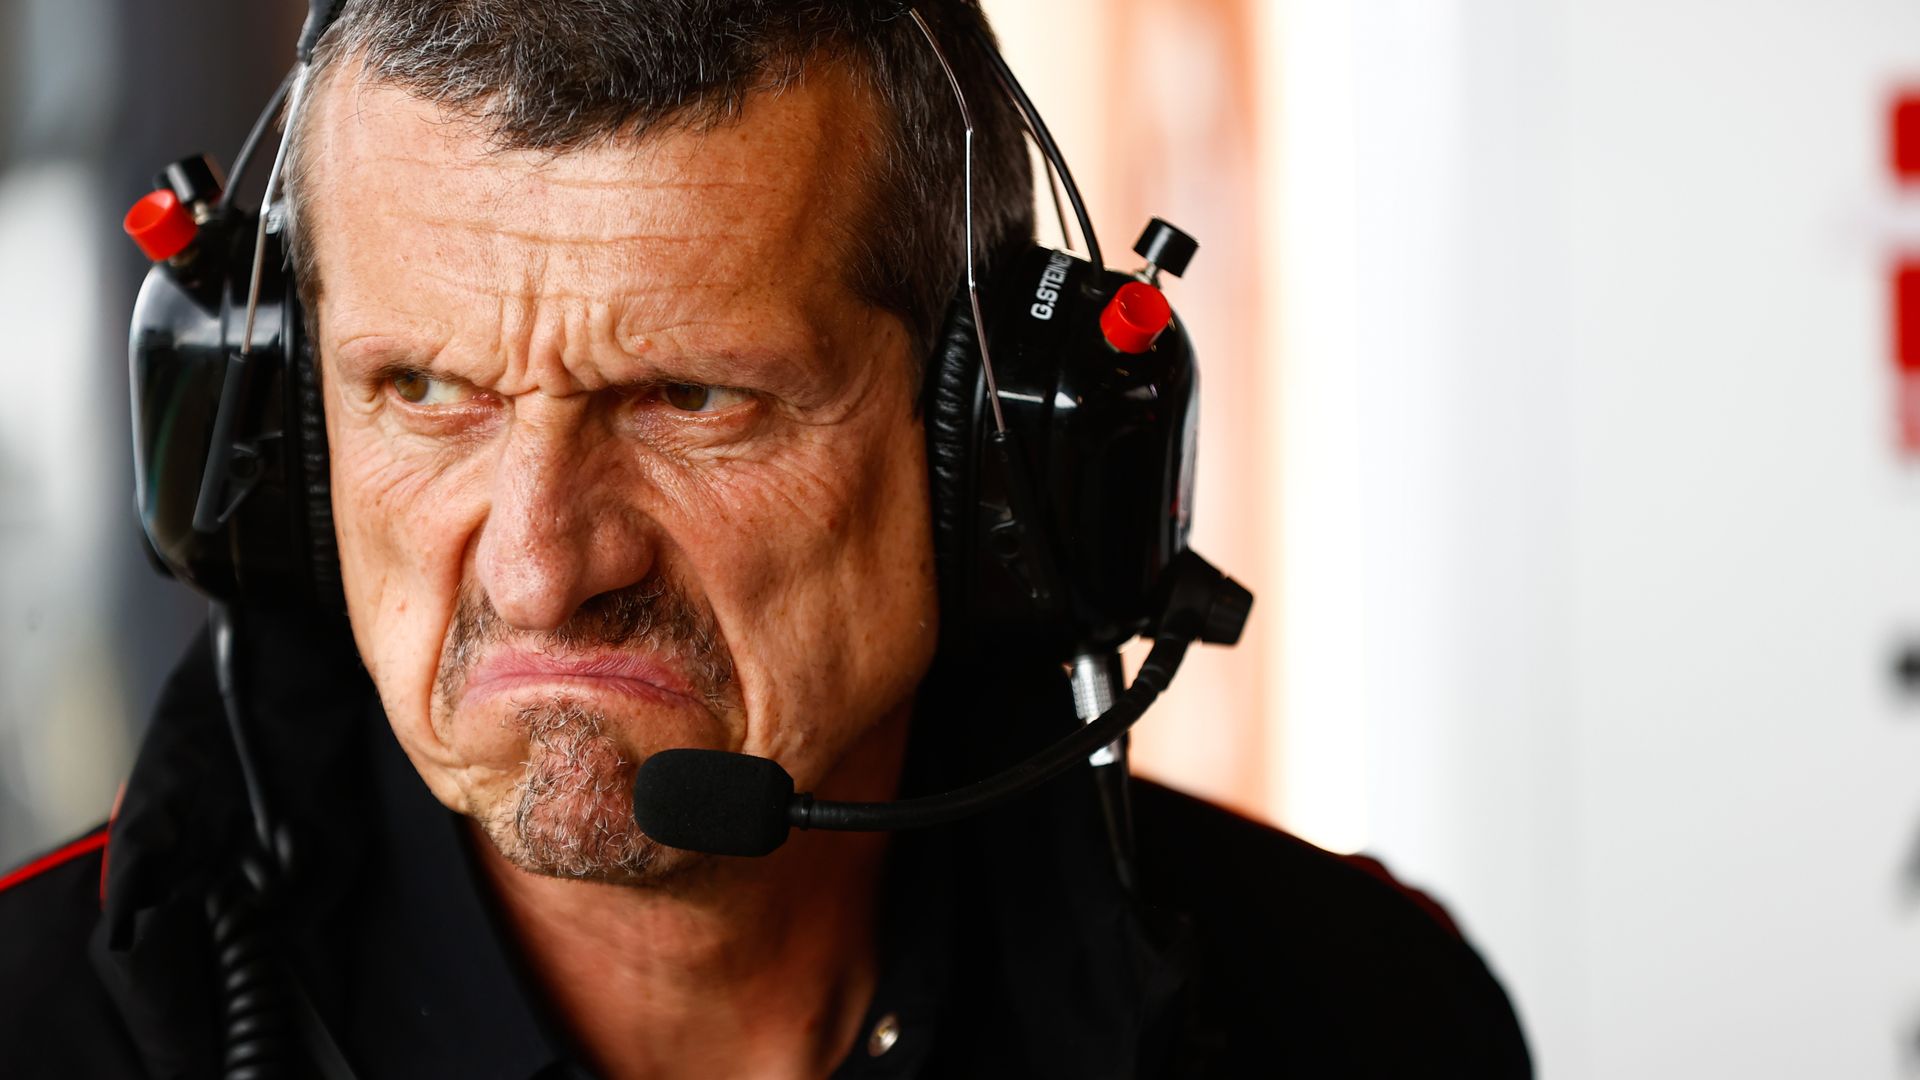 Not just another team boss exit: Steiner's cult status transcended F1